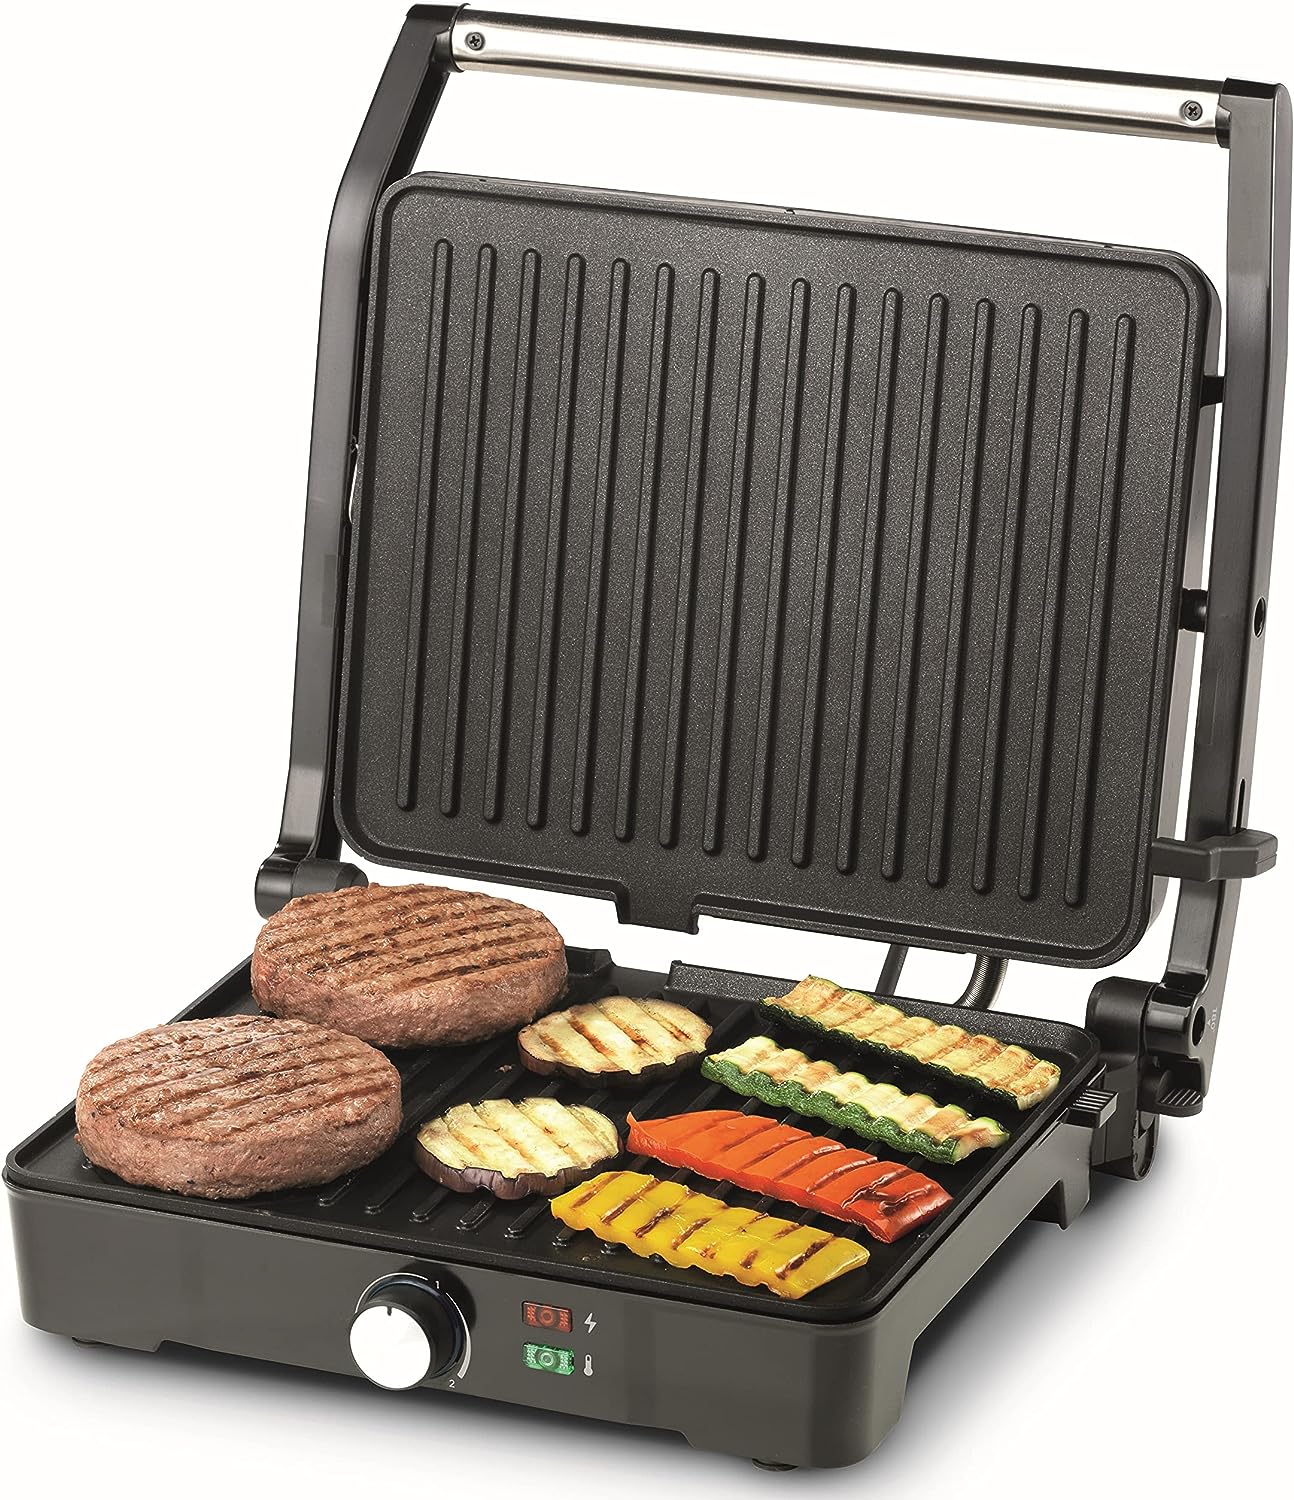 KENWOOD Grill 2000W Contact Health Grill Panini Press with Variable Temperature, 3 Grill Positions for Panini Burger Sandwich Pizza Steak Chicken , Fish , Vegetables HGM31.000SI Black/Silver , 1 Years Warranty.